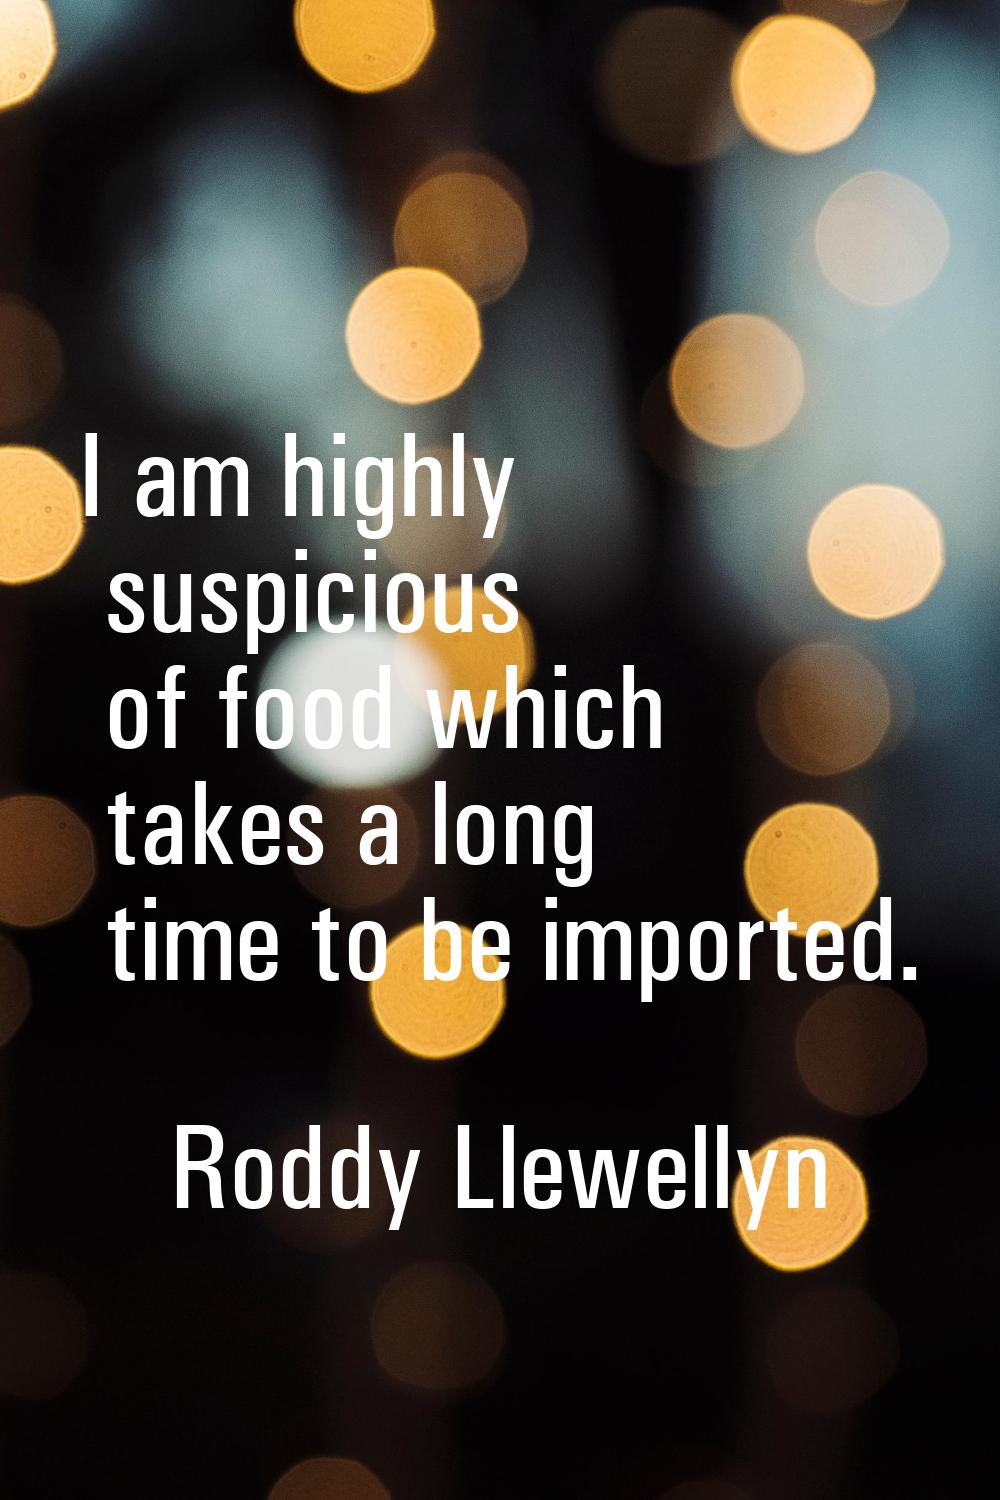 I am highly suspicious of food which takes a long time to be imported.